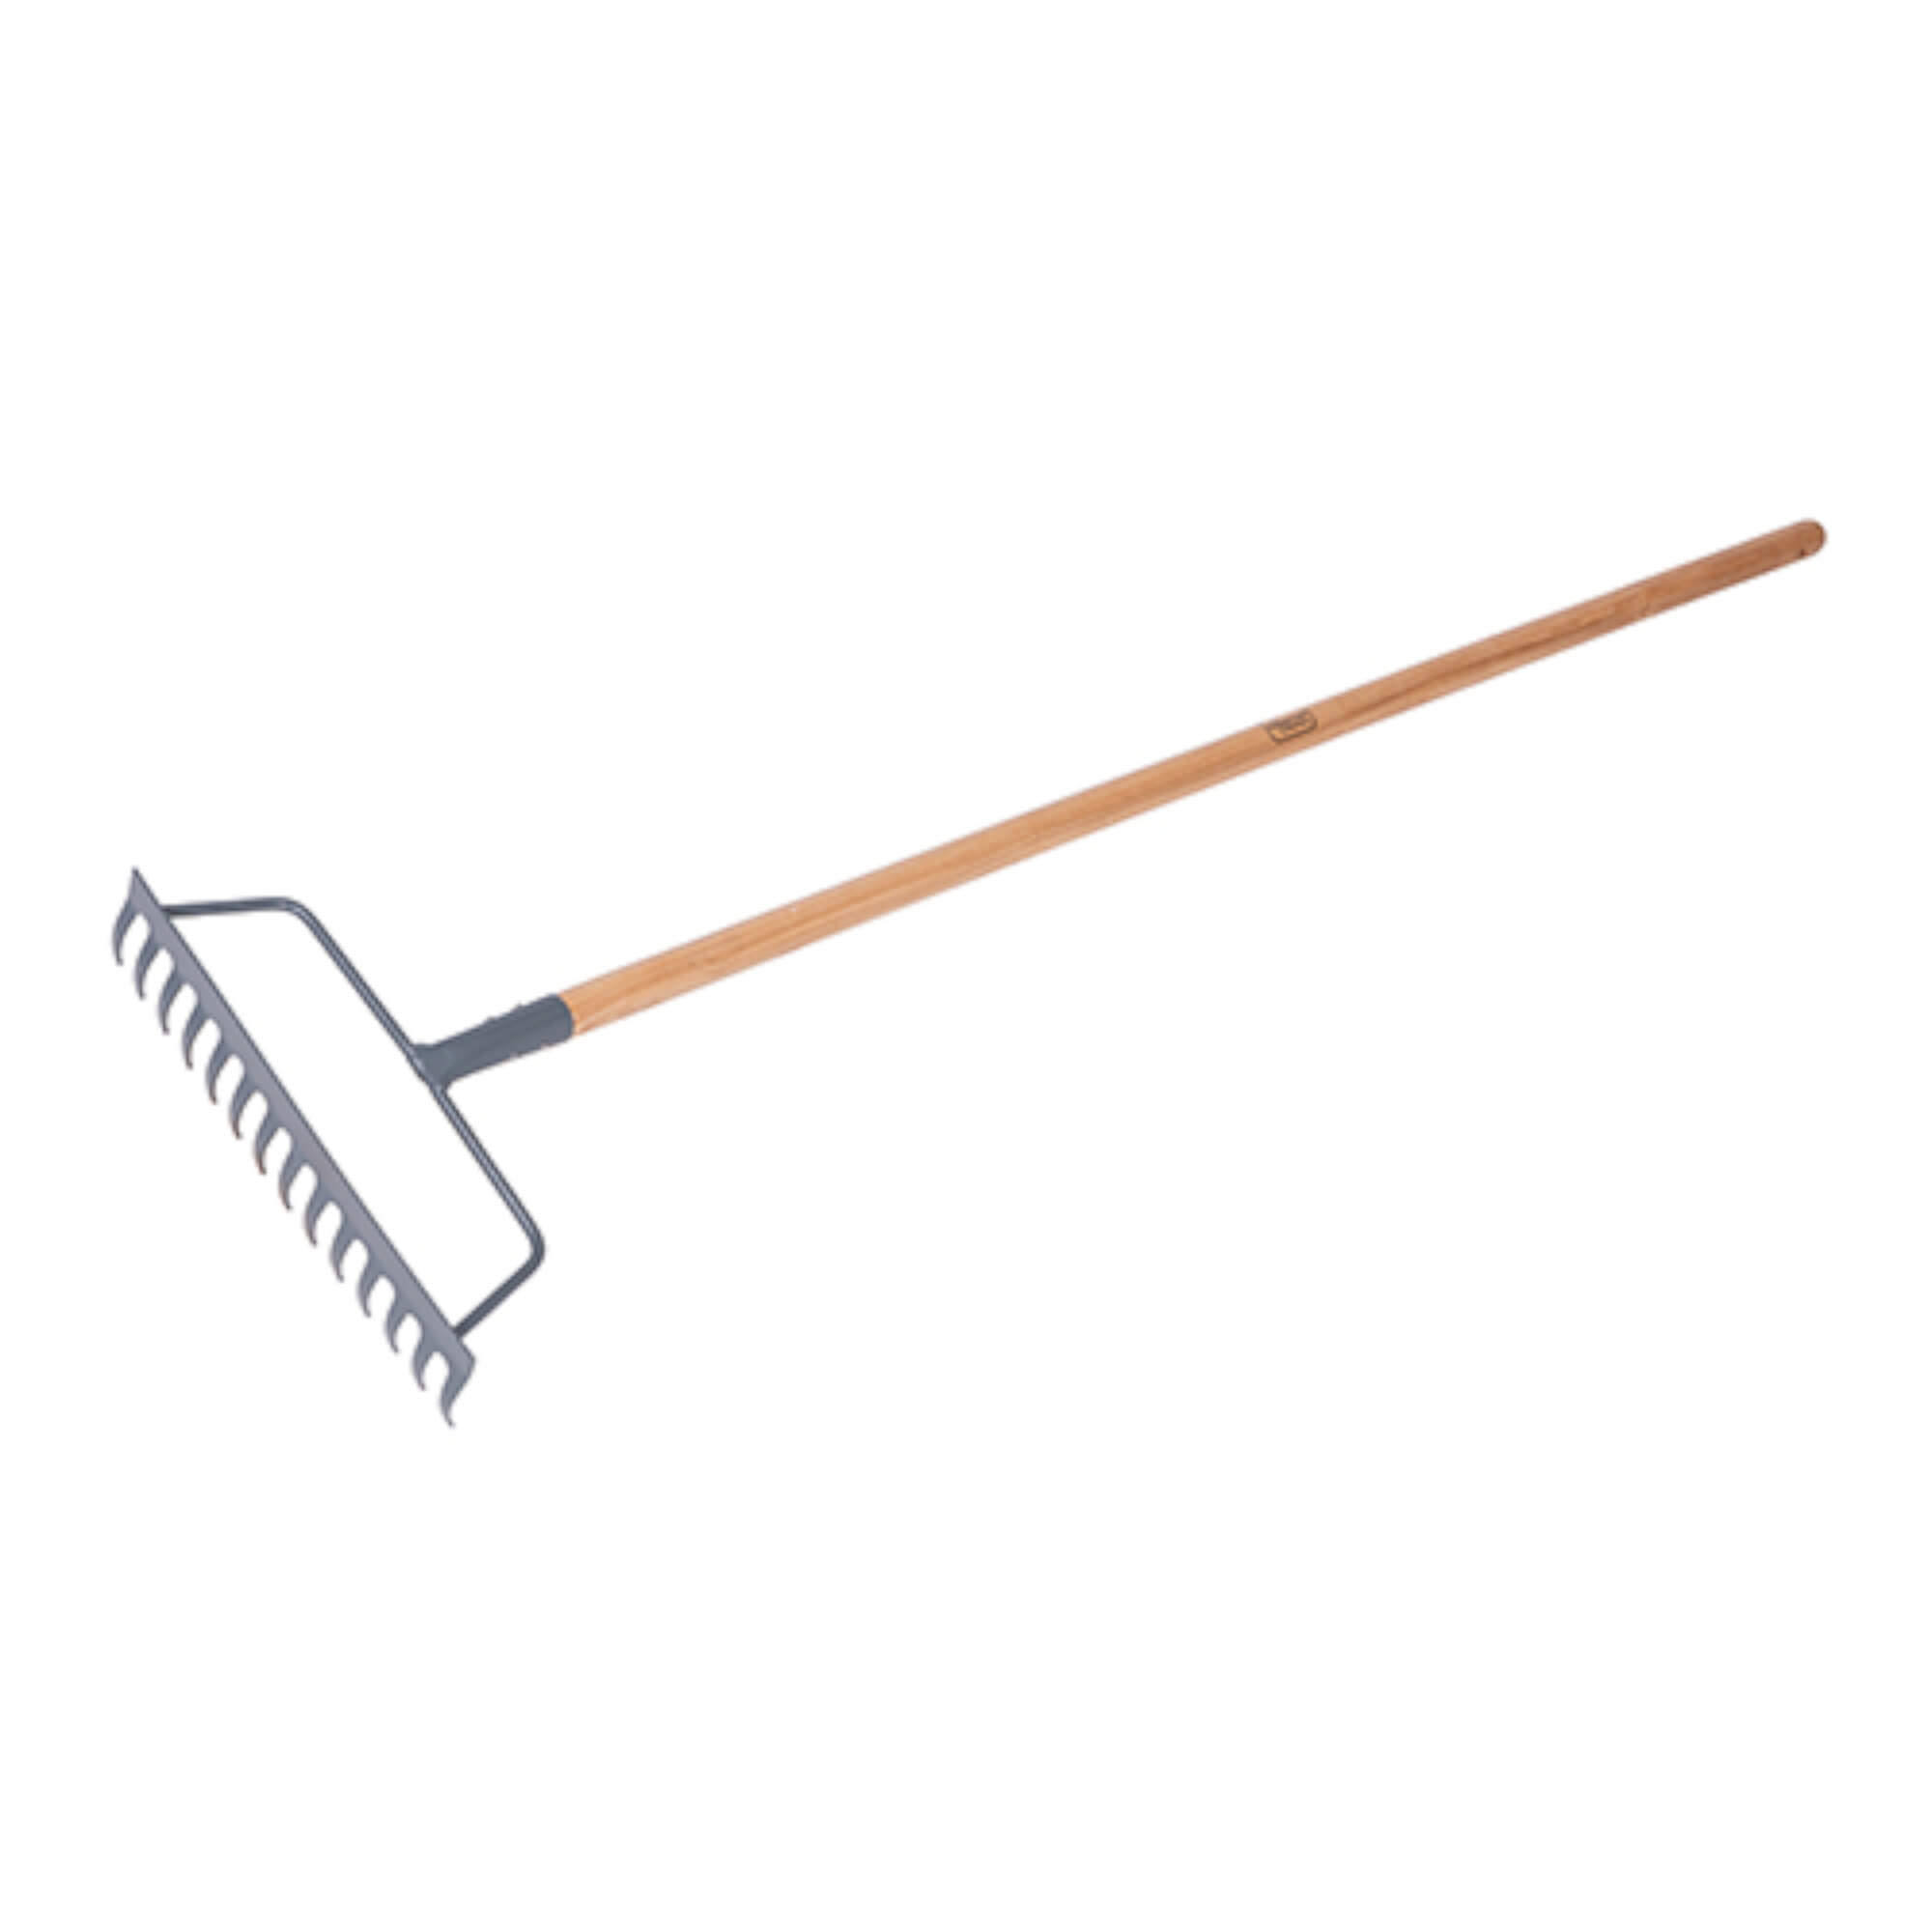 Carbon Steel Lawn Rake With Ash Handle Draper 14311 for sale online 